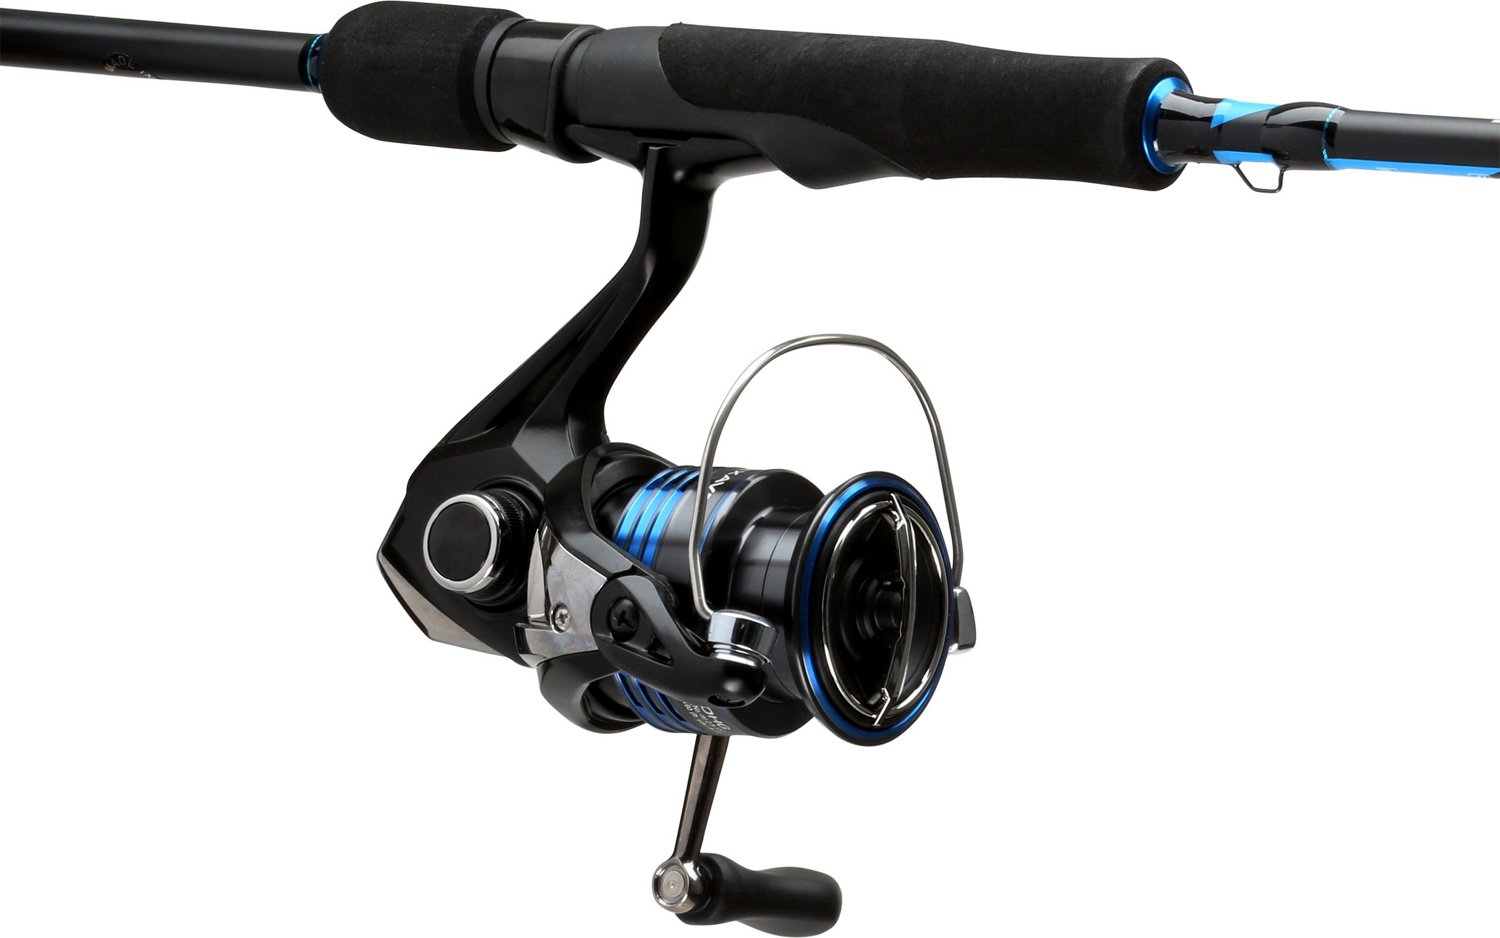 Lew's Hypersonic Speed Spin 6 ft 6 in L Spinning Rod and Reel Combo